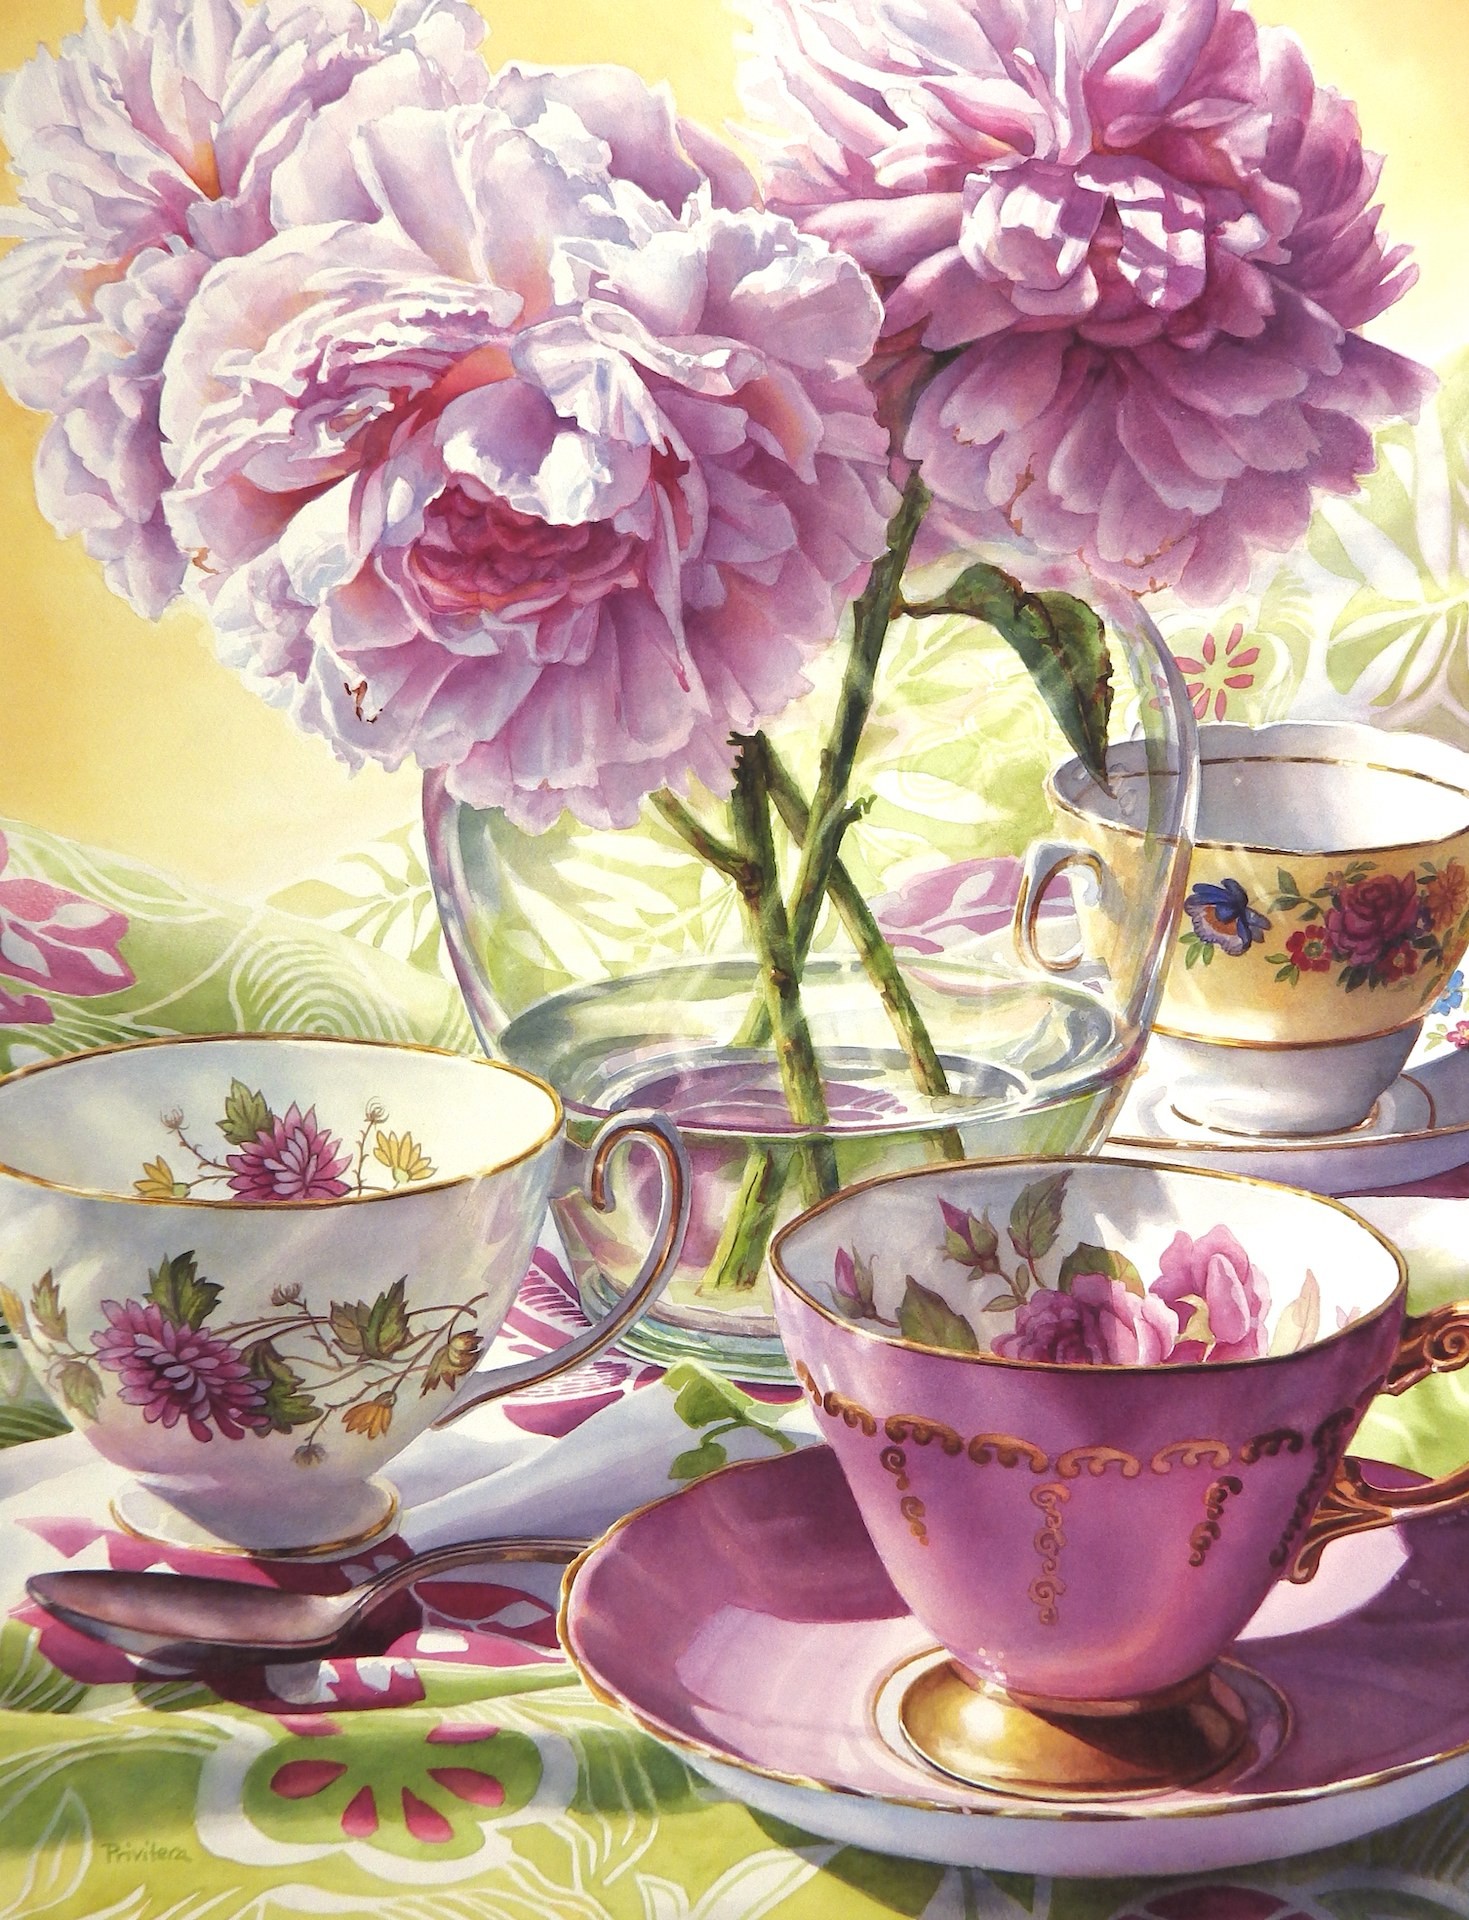 PleinAir Salon Online Art Competition February 2023 Honorable Mention Lana Privitera Pink Day at the Office Peony and Teacup Still Life Watercolor Painting